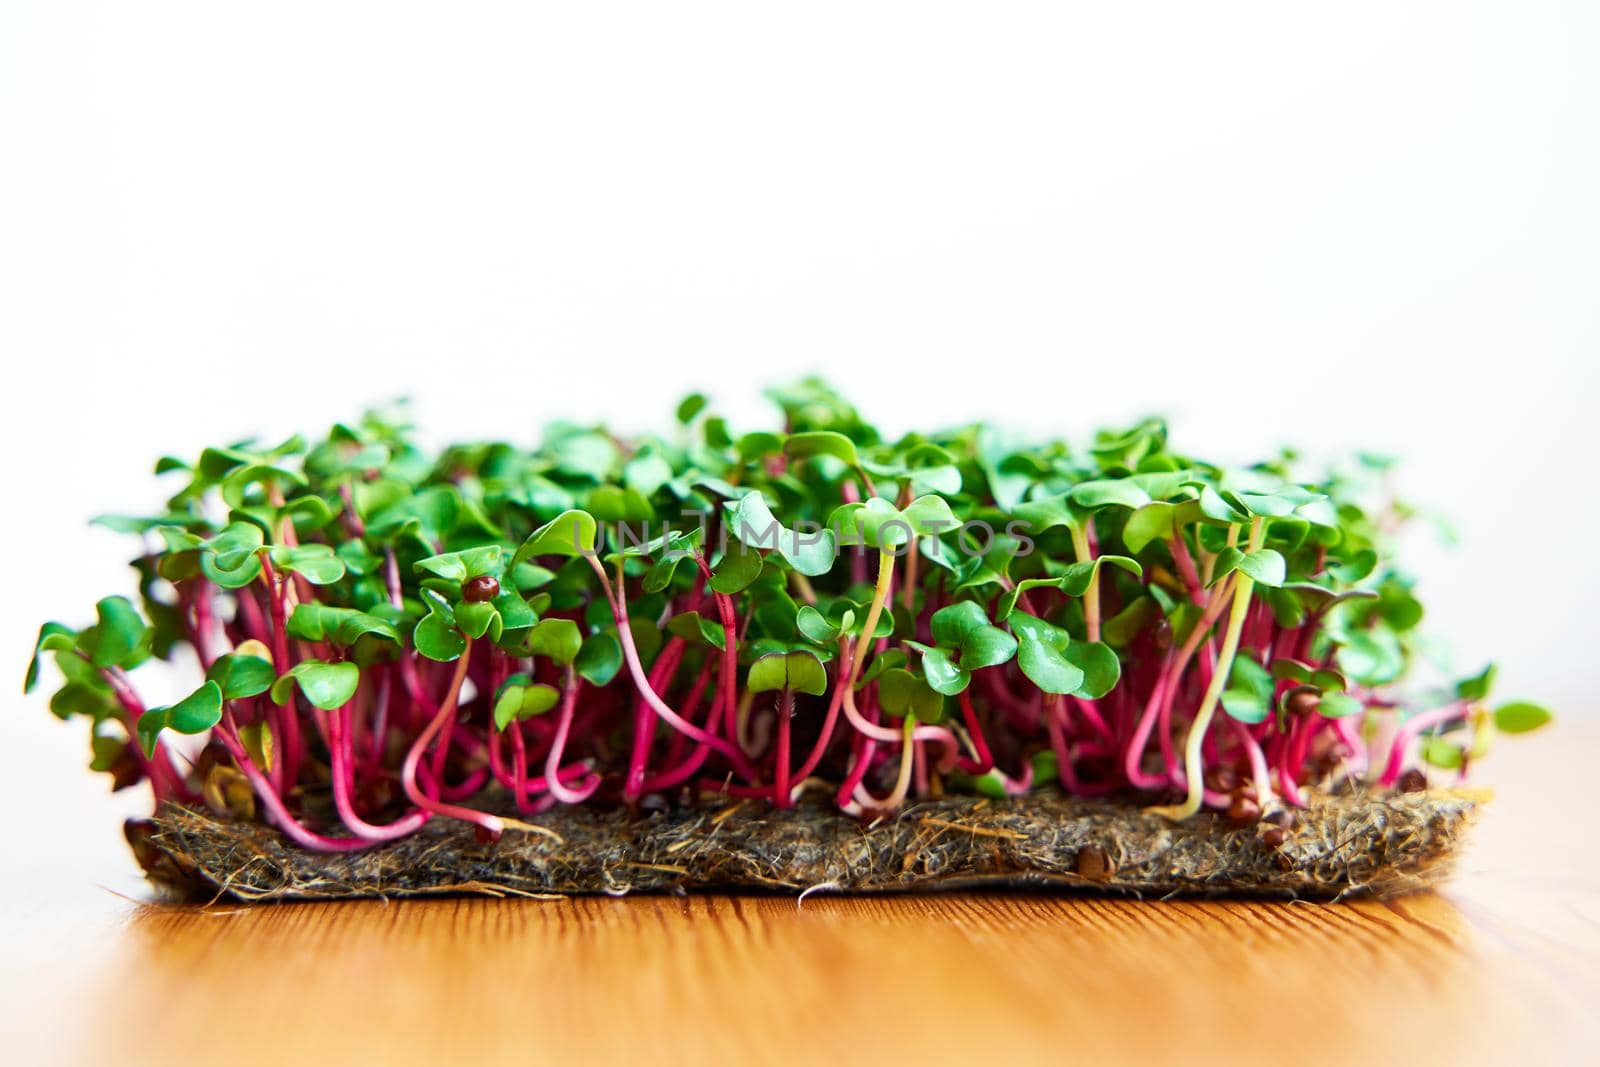 Microgreen radish planted without box on wooden background.